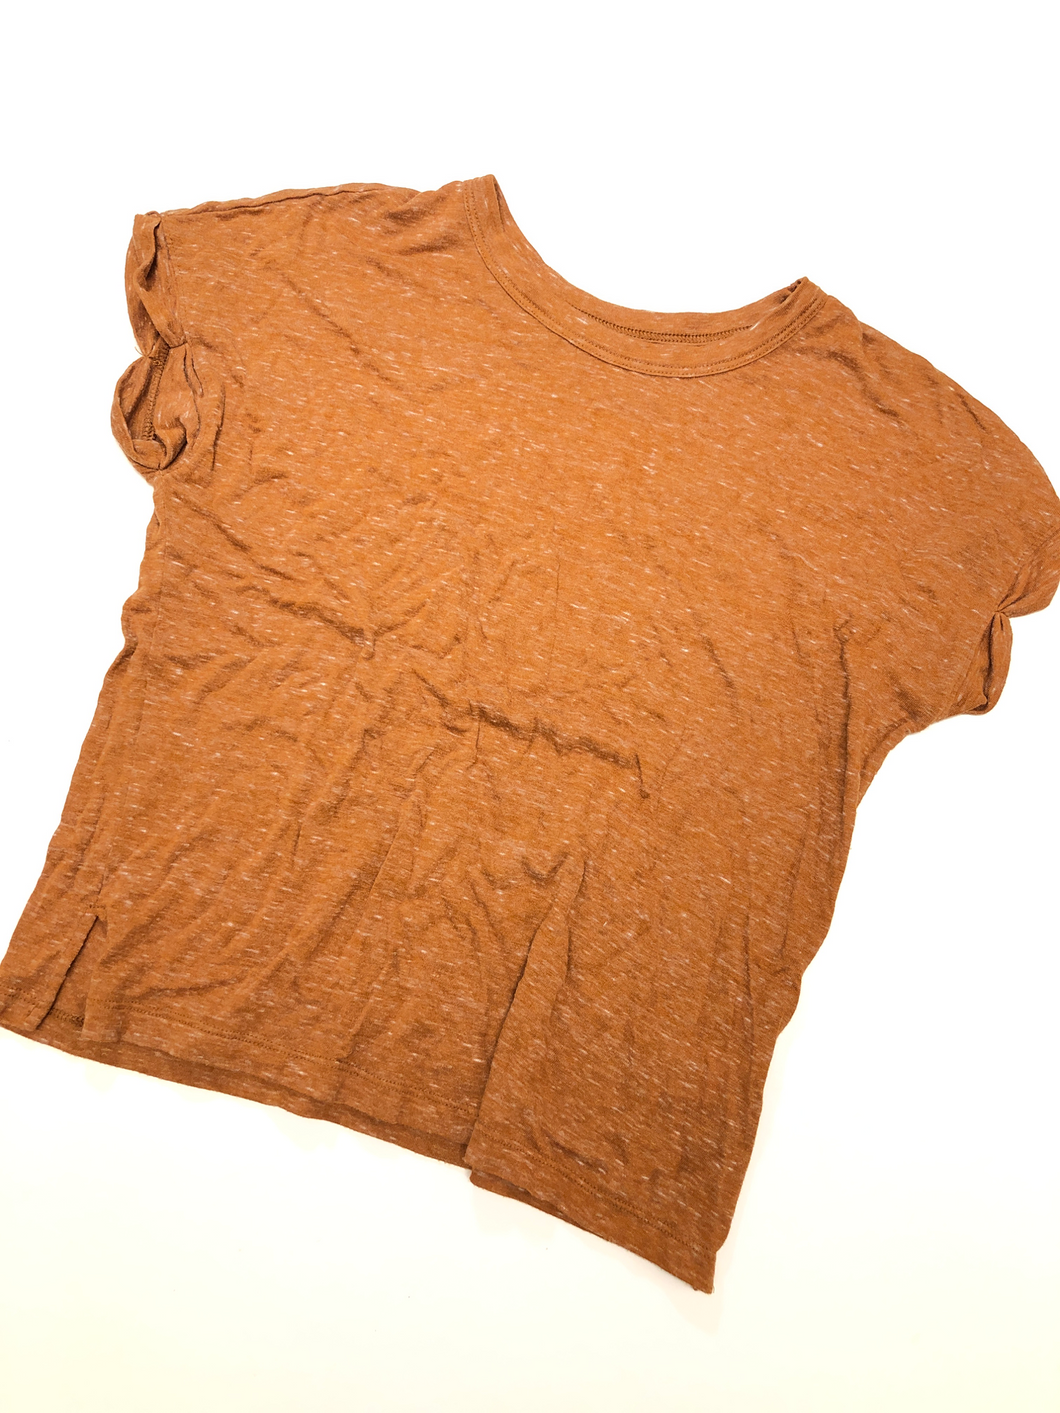 Mudd Crop Top T-Shirt Size Extra Small